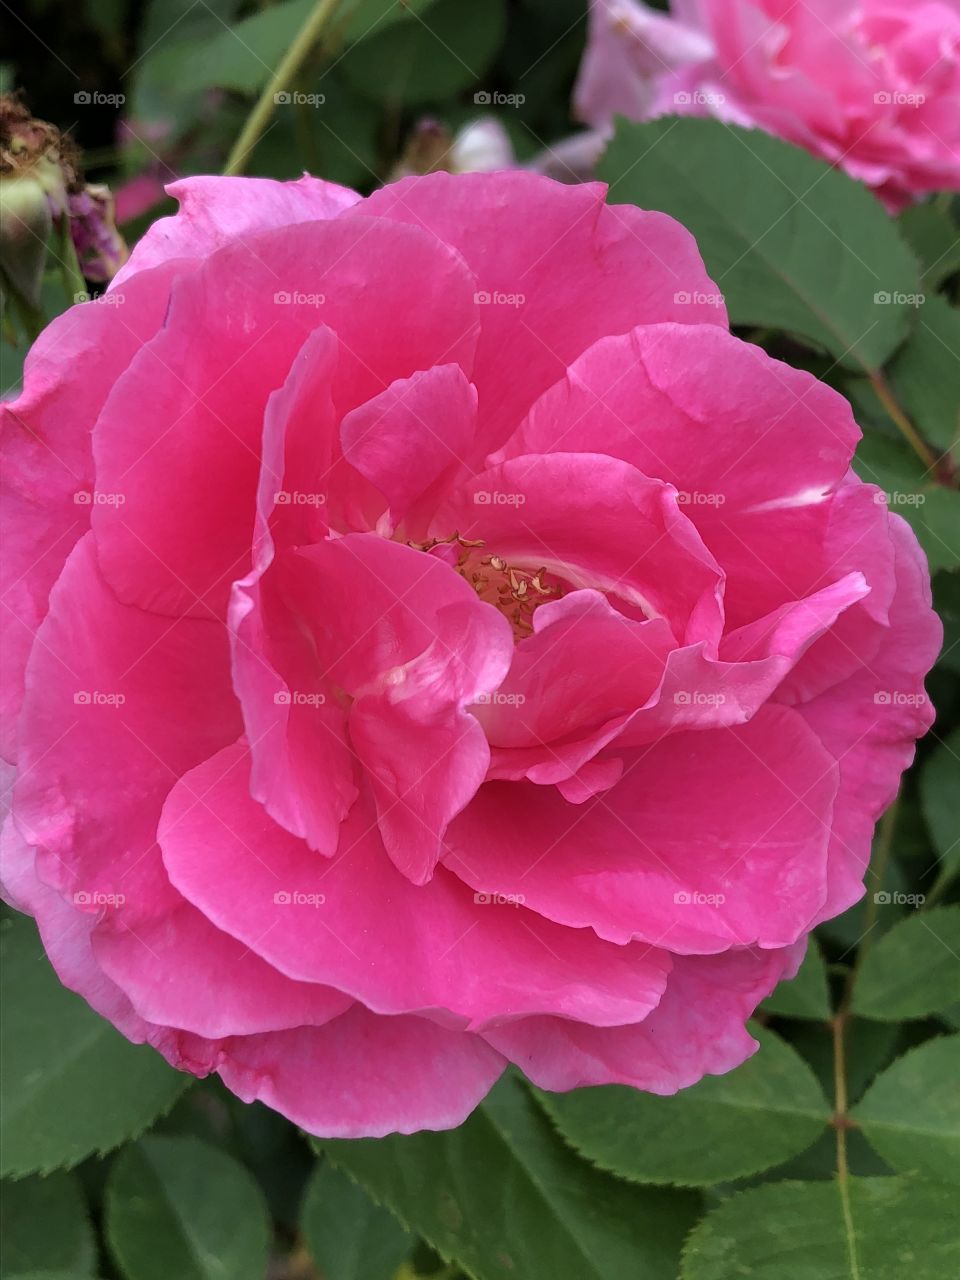 A beautiful picture of a pink rose blossom! Picture taken in Colonial Park in Somerset, NJ. 